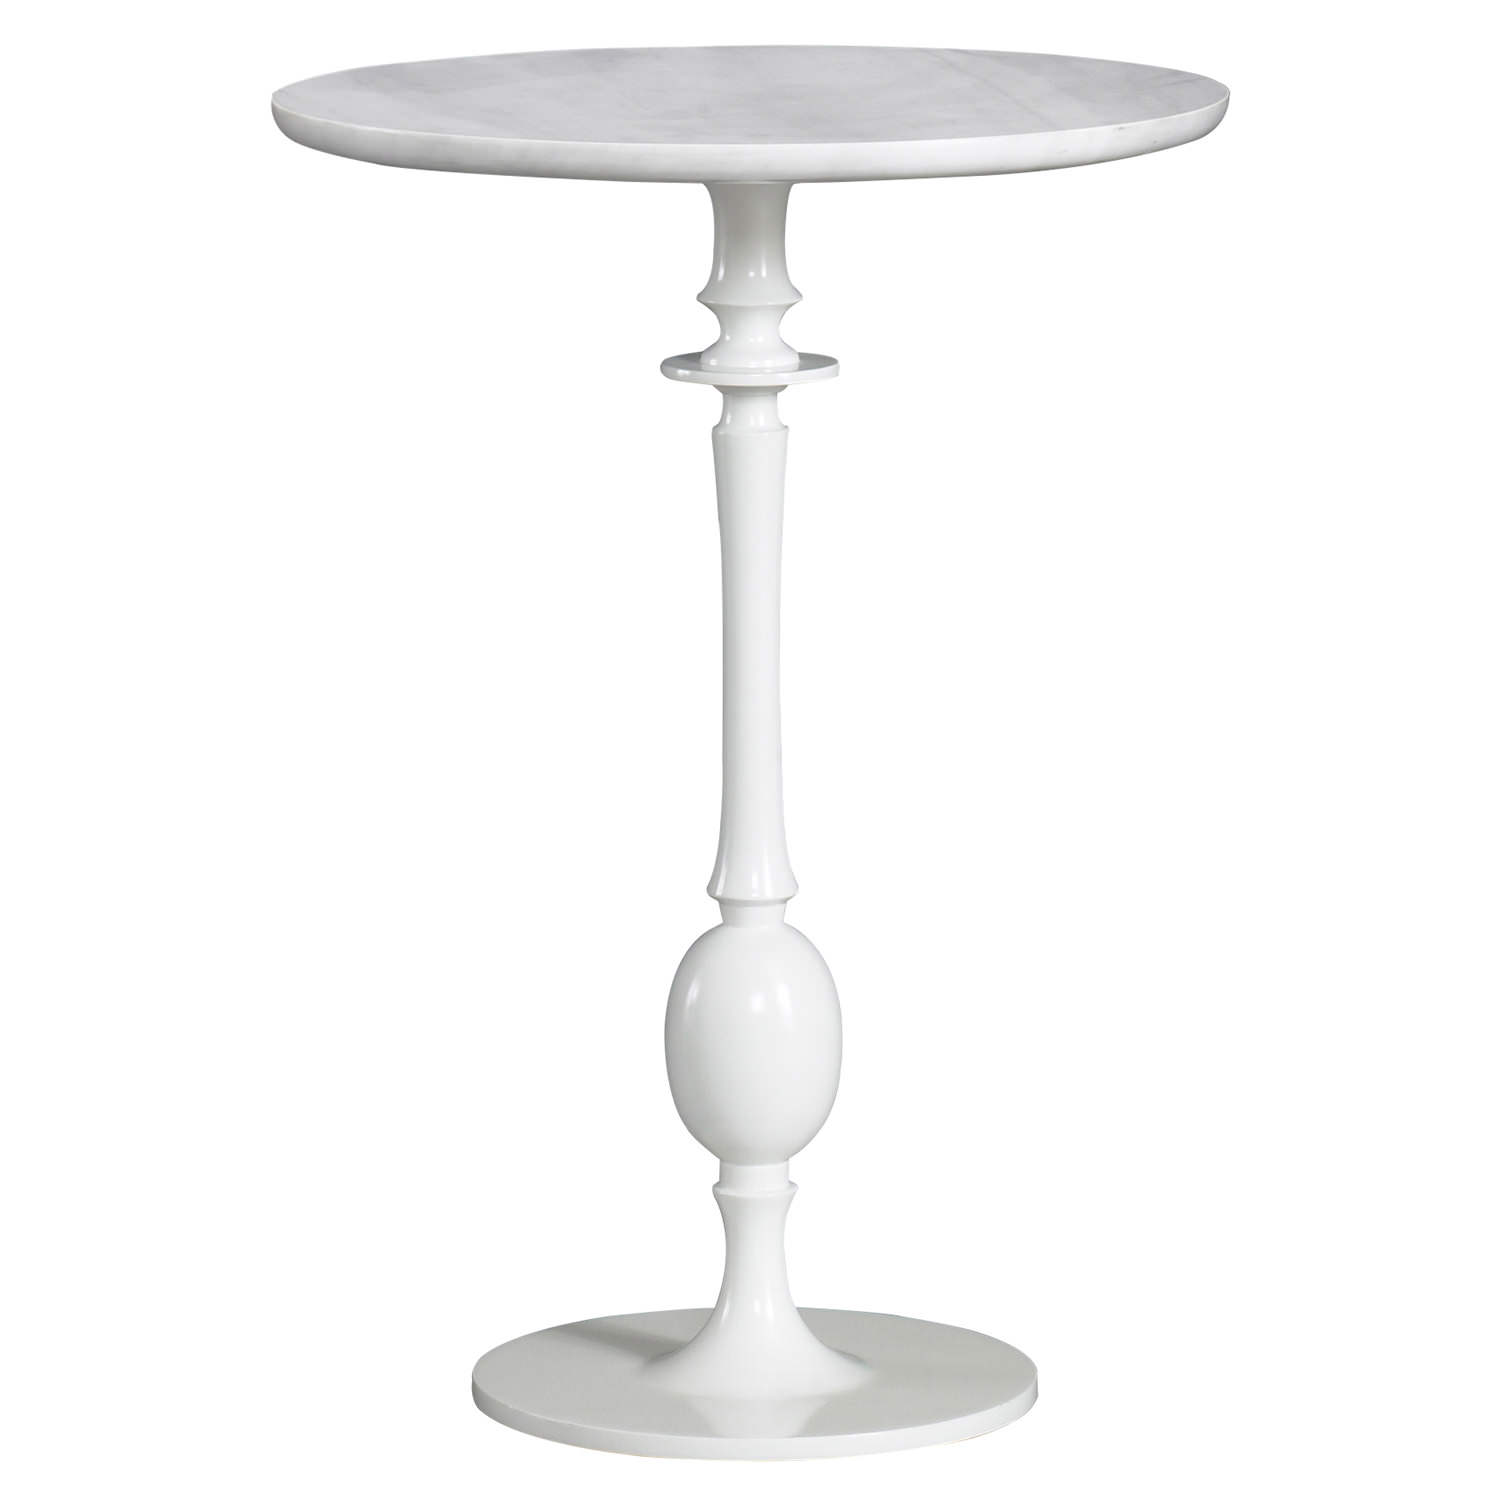 build pedestal accent table khandzoo home decor white tables edmonton inspiration gallery from dale tiffany pendant lights round wicker and chairs teak wood side square cherry